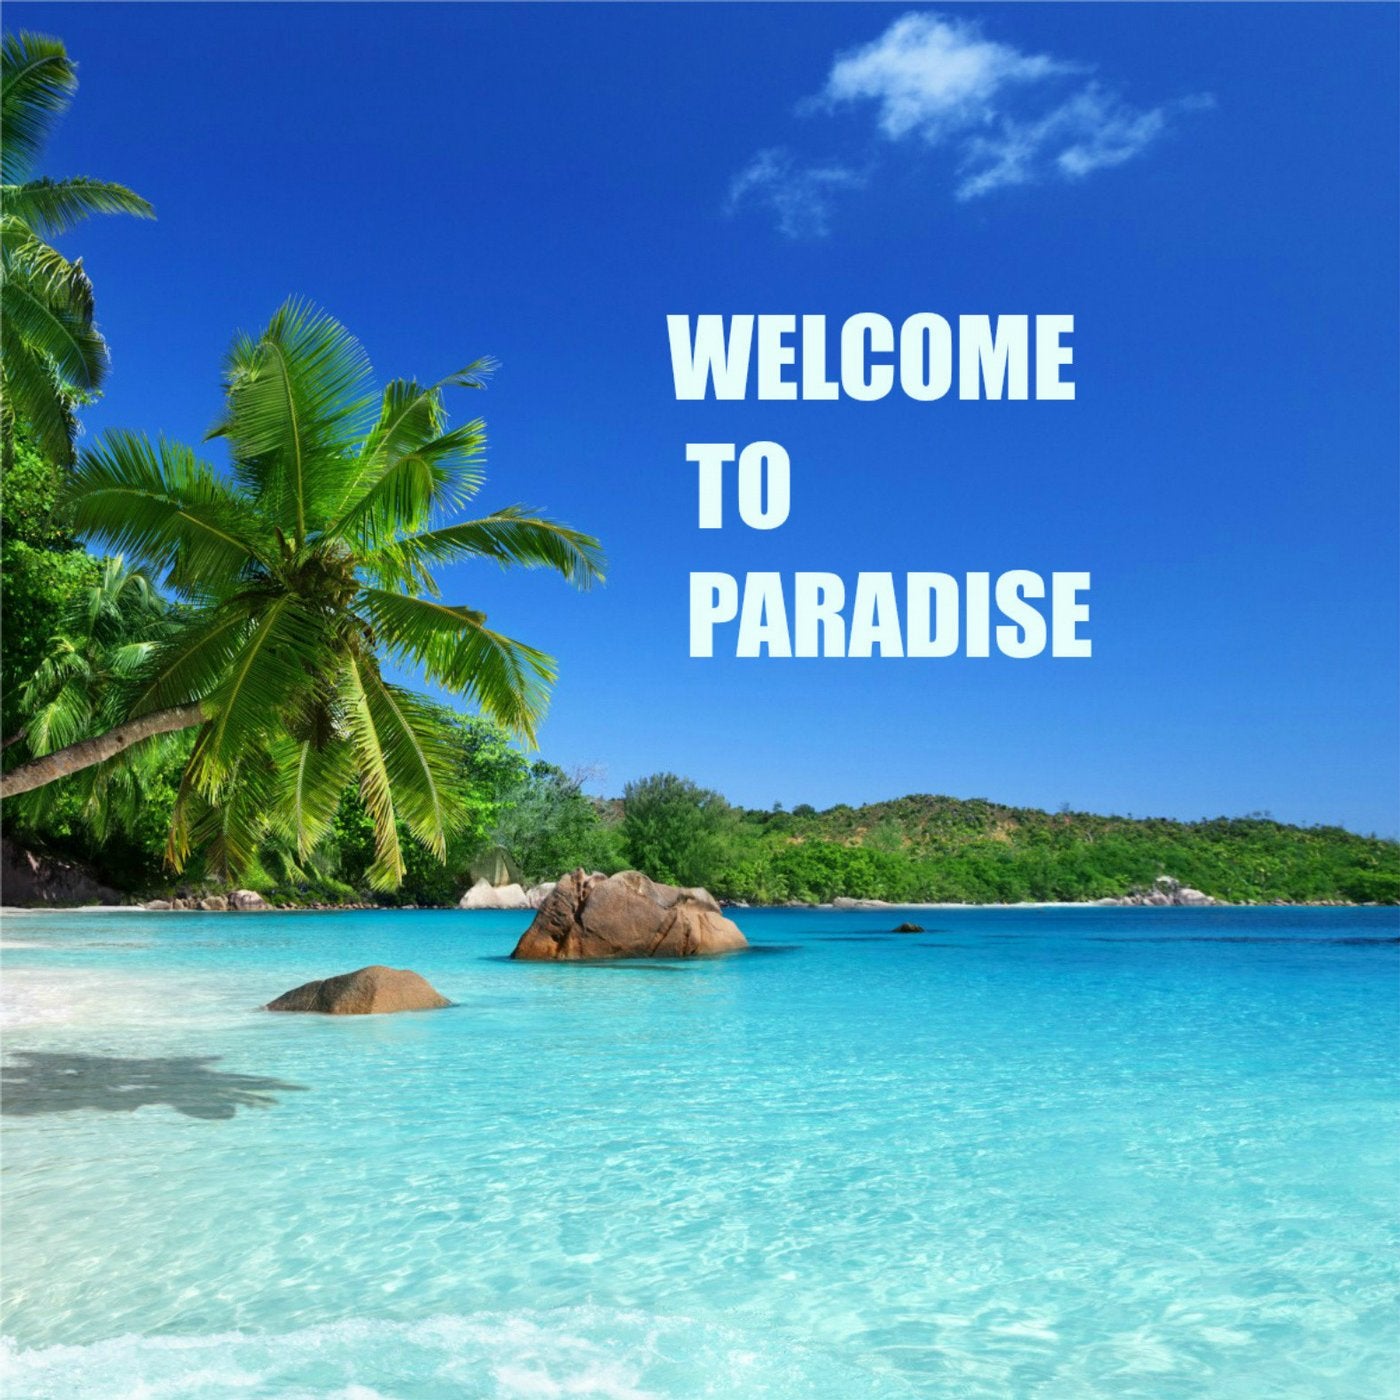 Welcome to paradise обзор. Paradise картинки. Рай надпись. Welcome to Paradise. Рай с надписью рай.